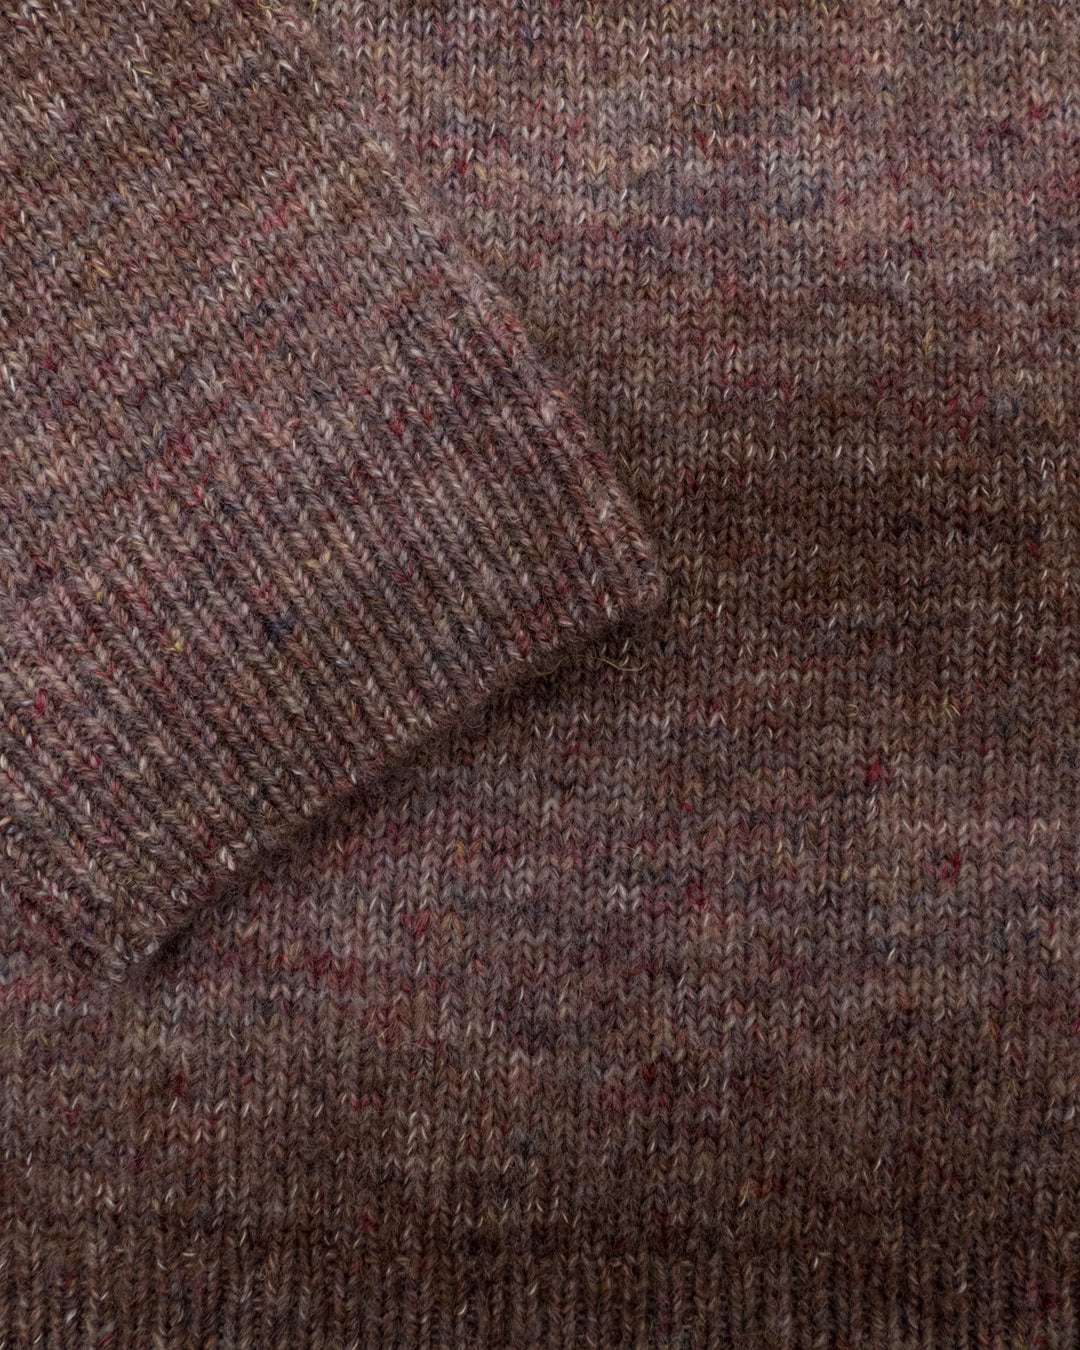 Turtleneck Degradé in Old Rose Stripes Pullover Colours and Sons   